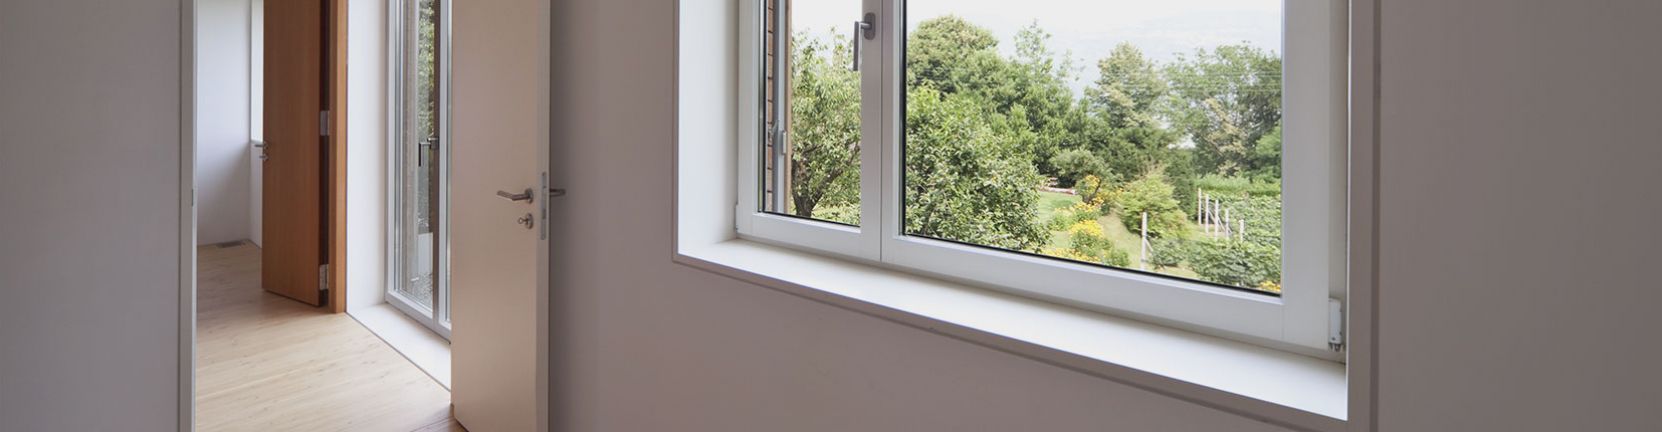 What Are The Benefits Of Installing Energy Efficient Windows In My Home?